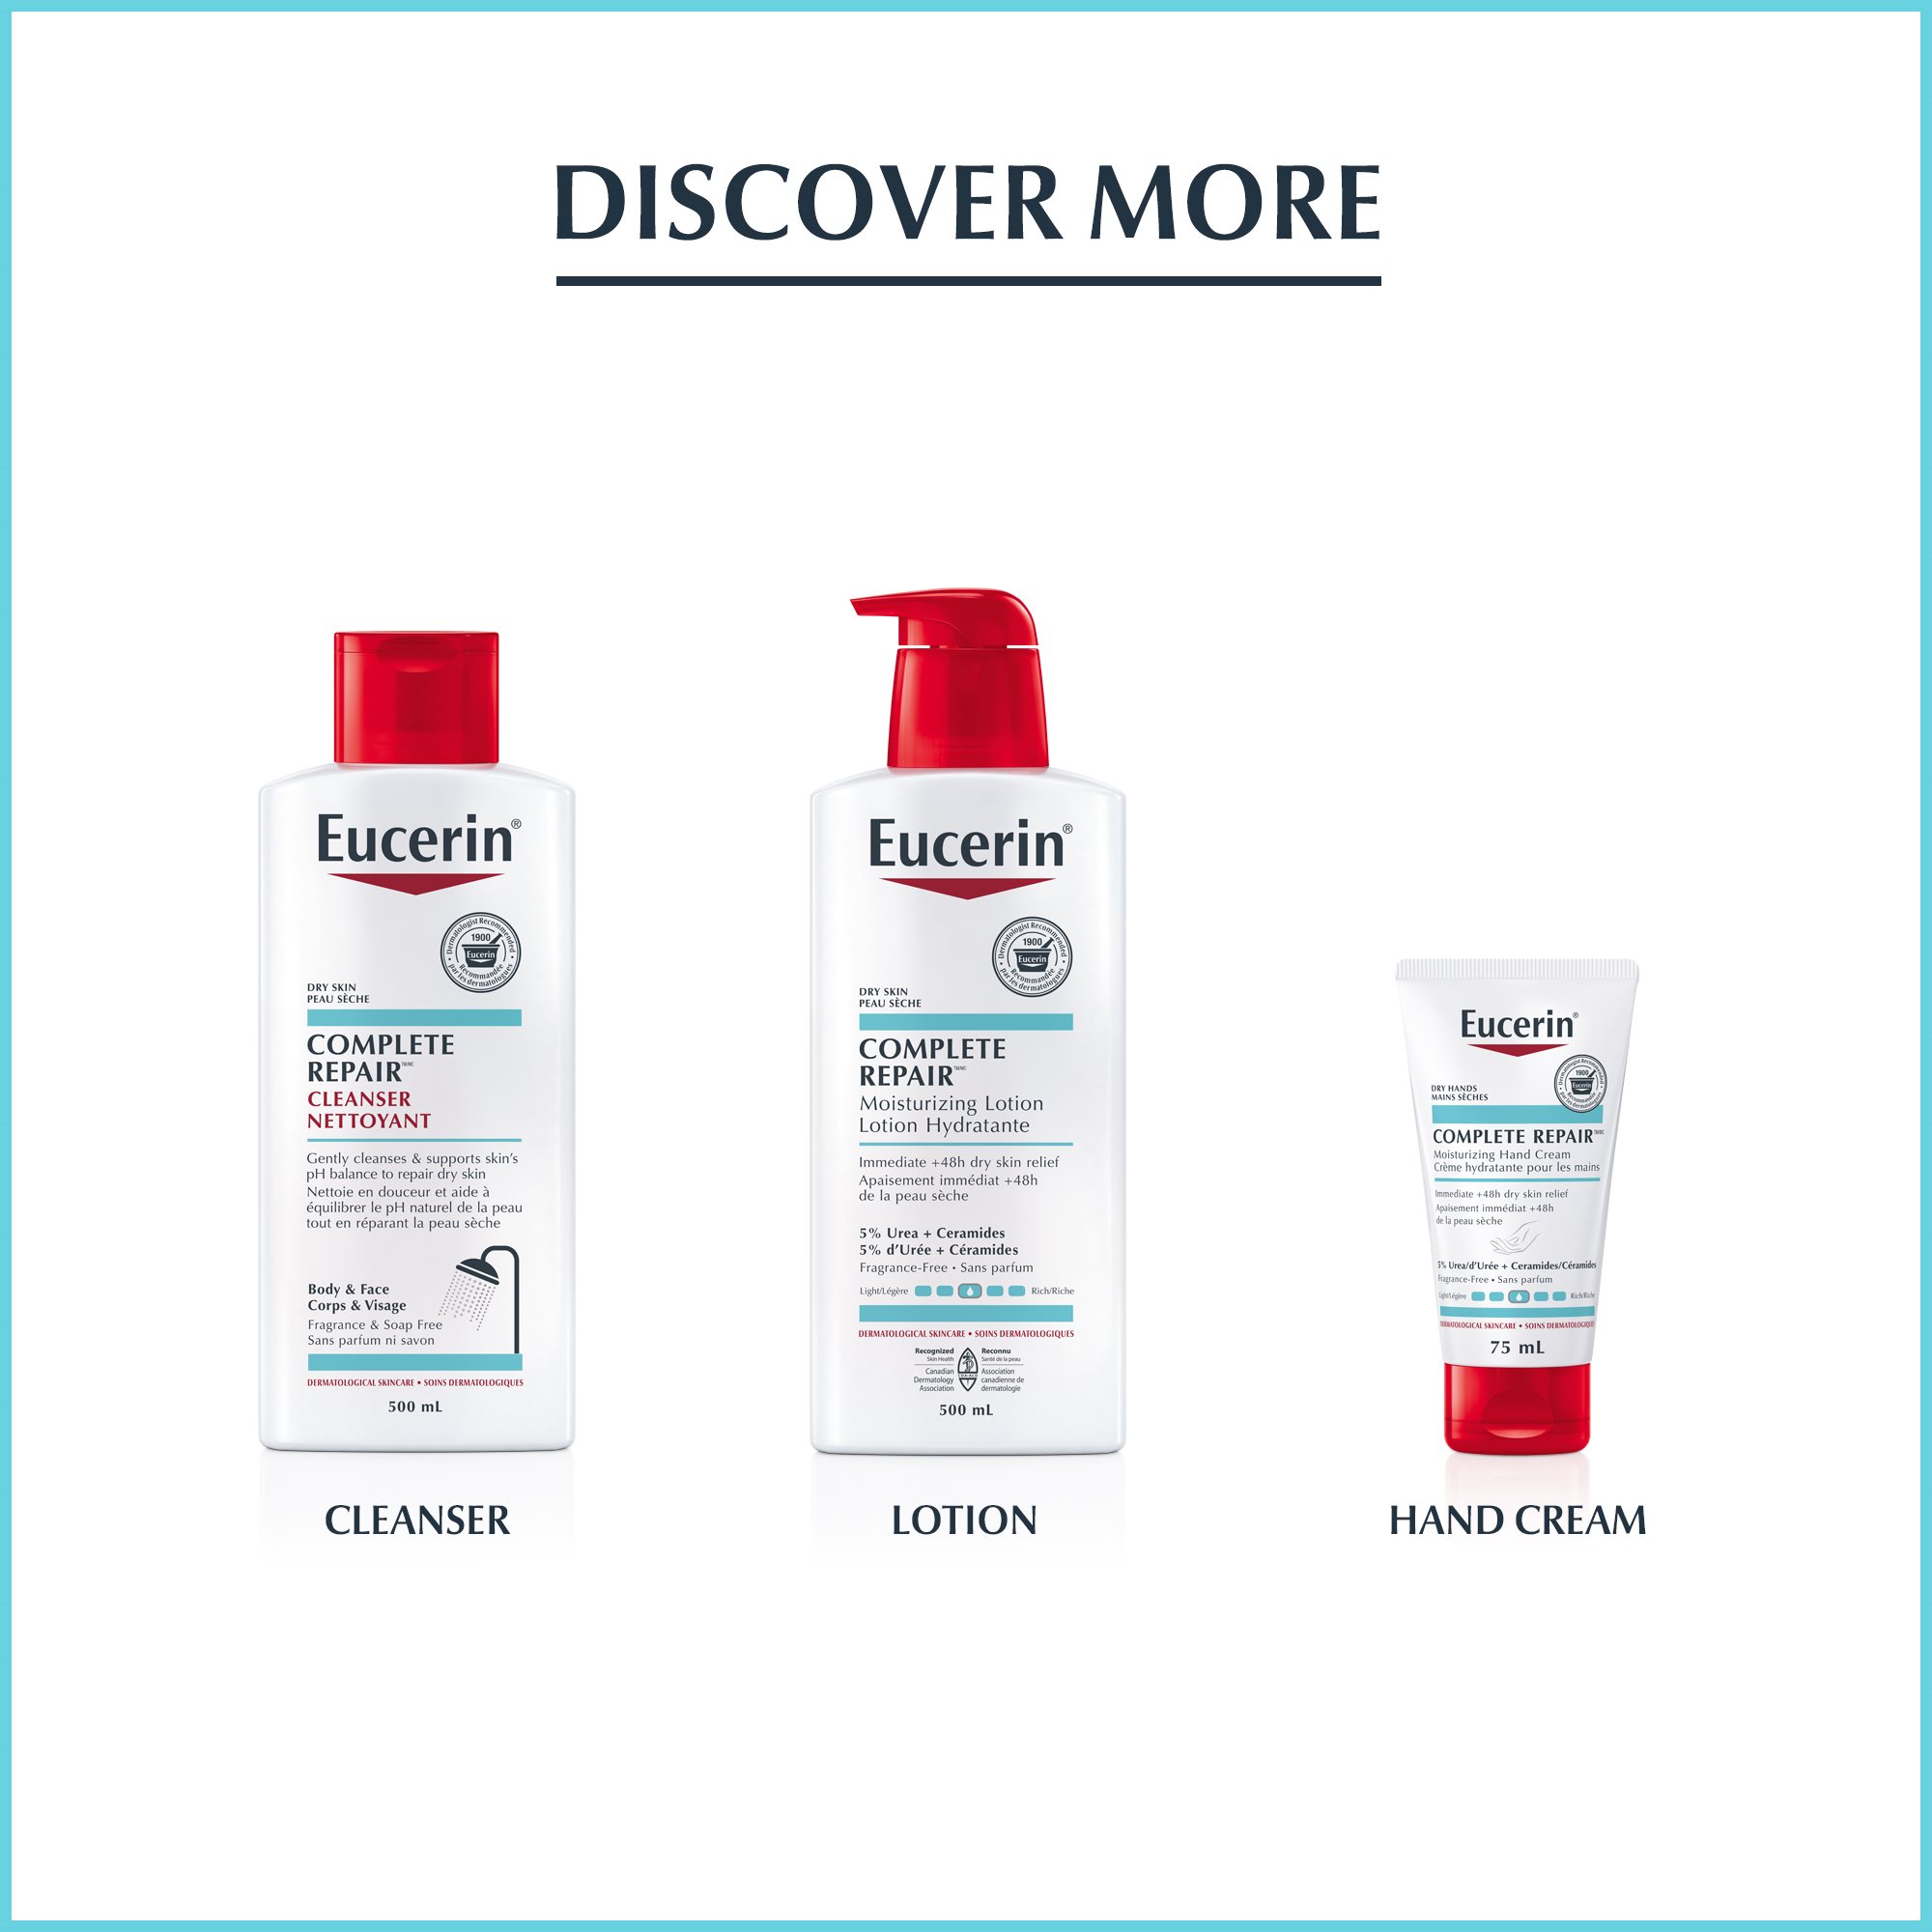 Image of the Eucerin cleanser, lotion and hand cream from the Complete Repair line.